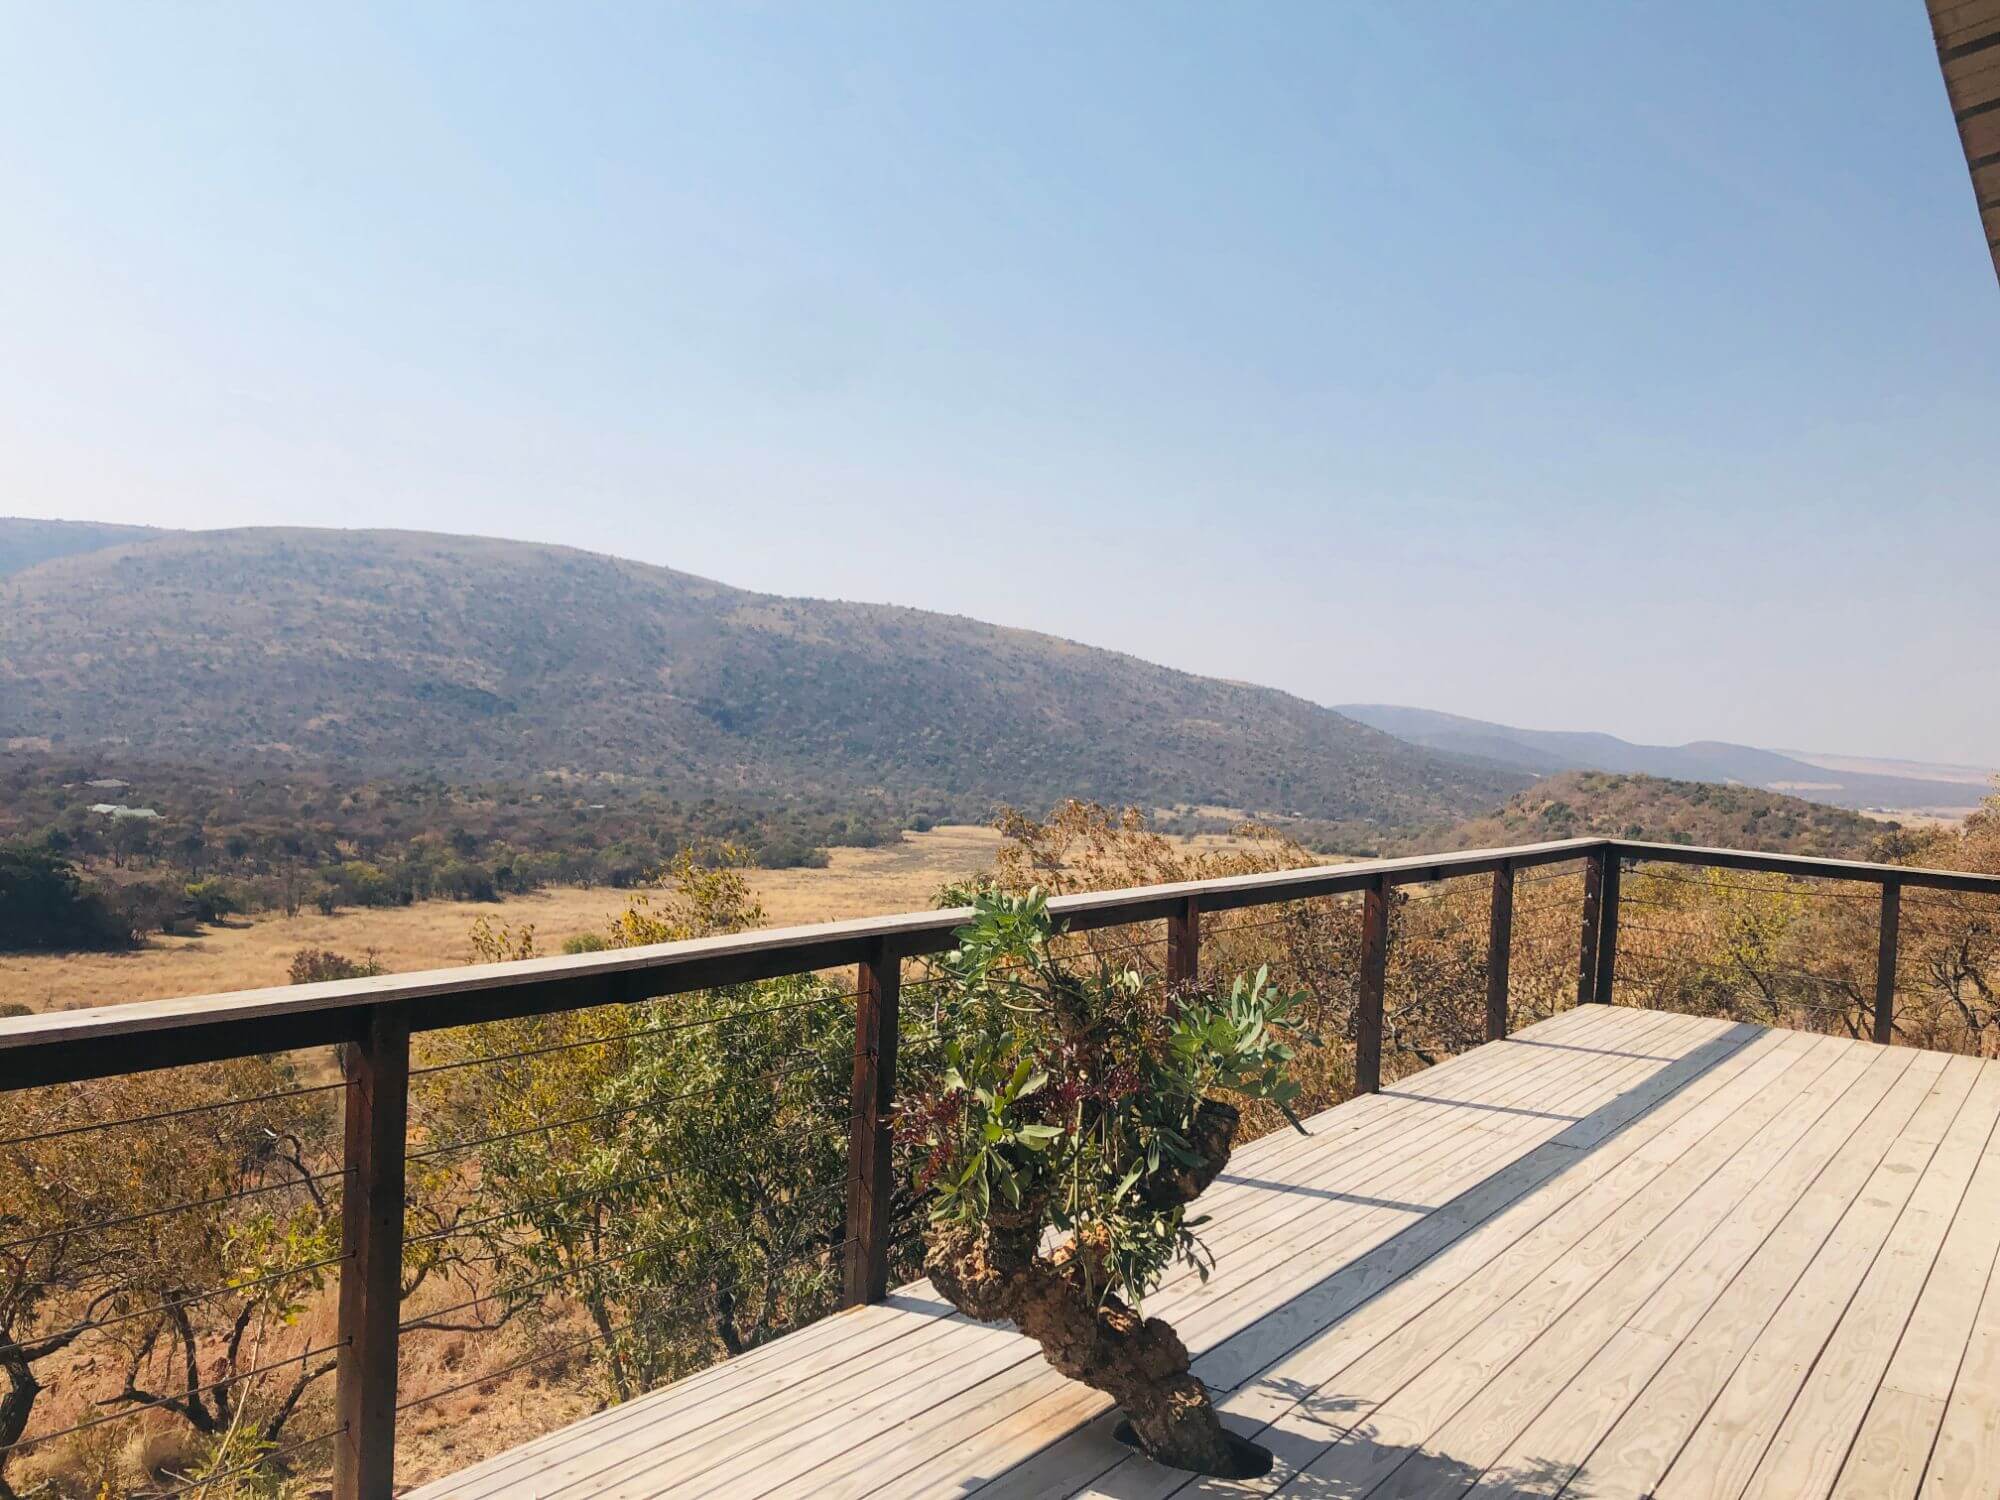 A unique 1,500-hectare bush retreat in the Waterberg, only an hour and a half from Pretoria and two hours from Johannesburg, Boschhoek Mountain Estate offers residents a sanctuary away from the hustle and bustle of Gauteng city life – and offers management some unusual opportunities.